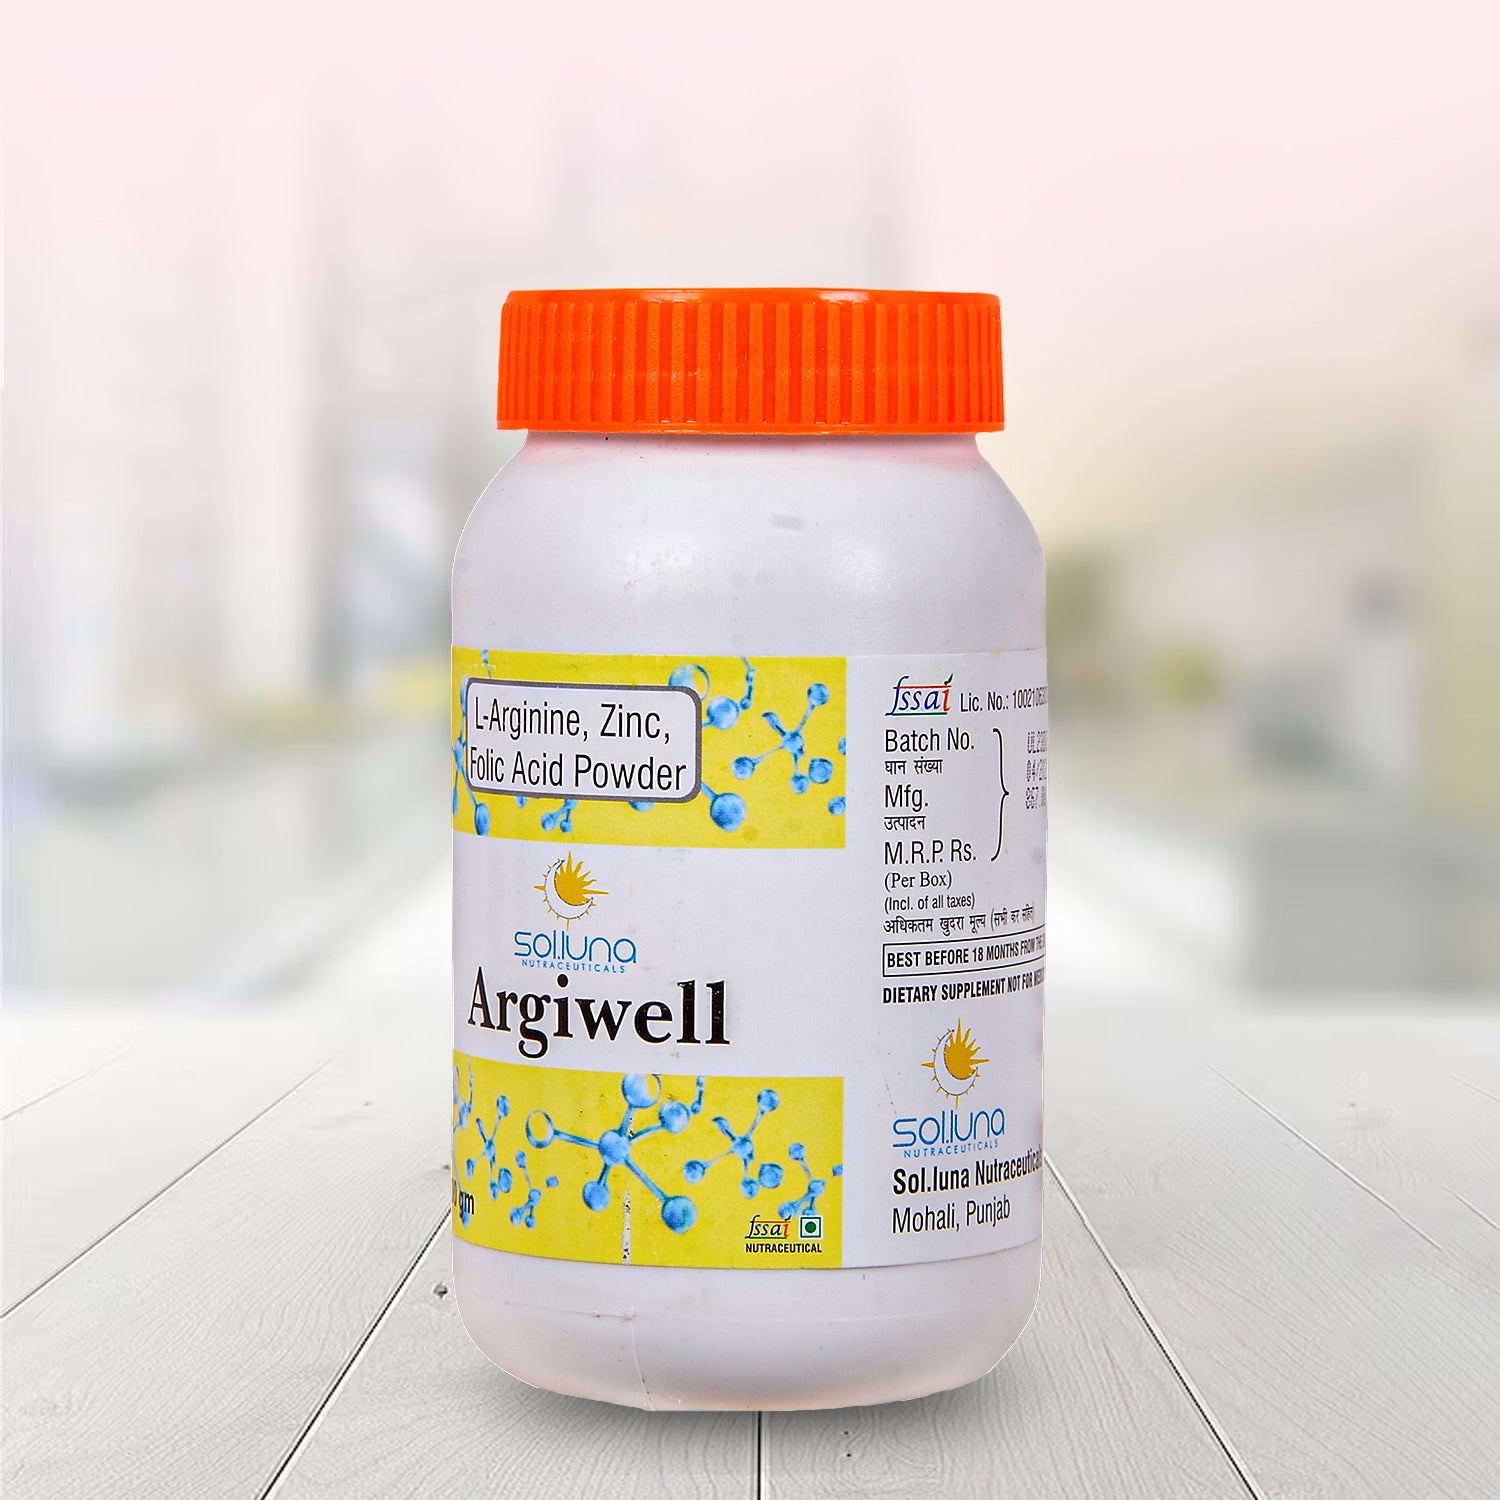 Argiwell - Natural Testo Booster and Performance Support